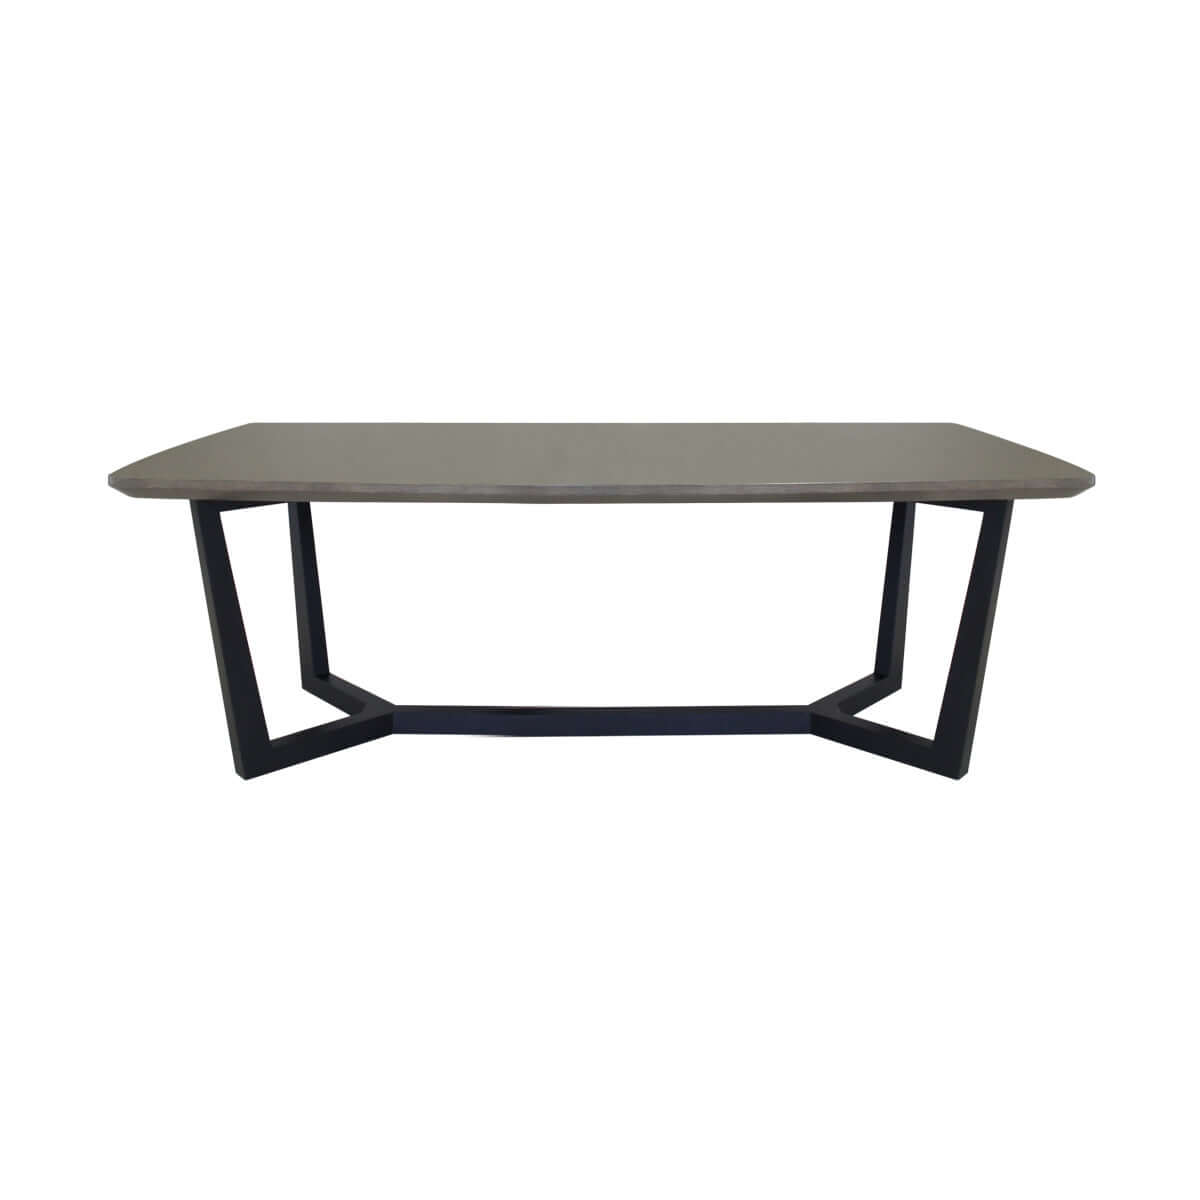 indonesia online furniture - dining table with wood top and legs